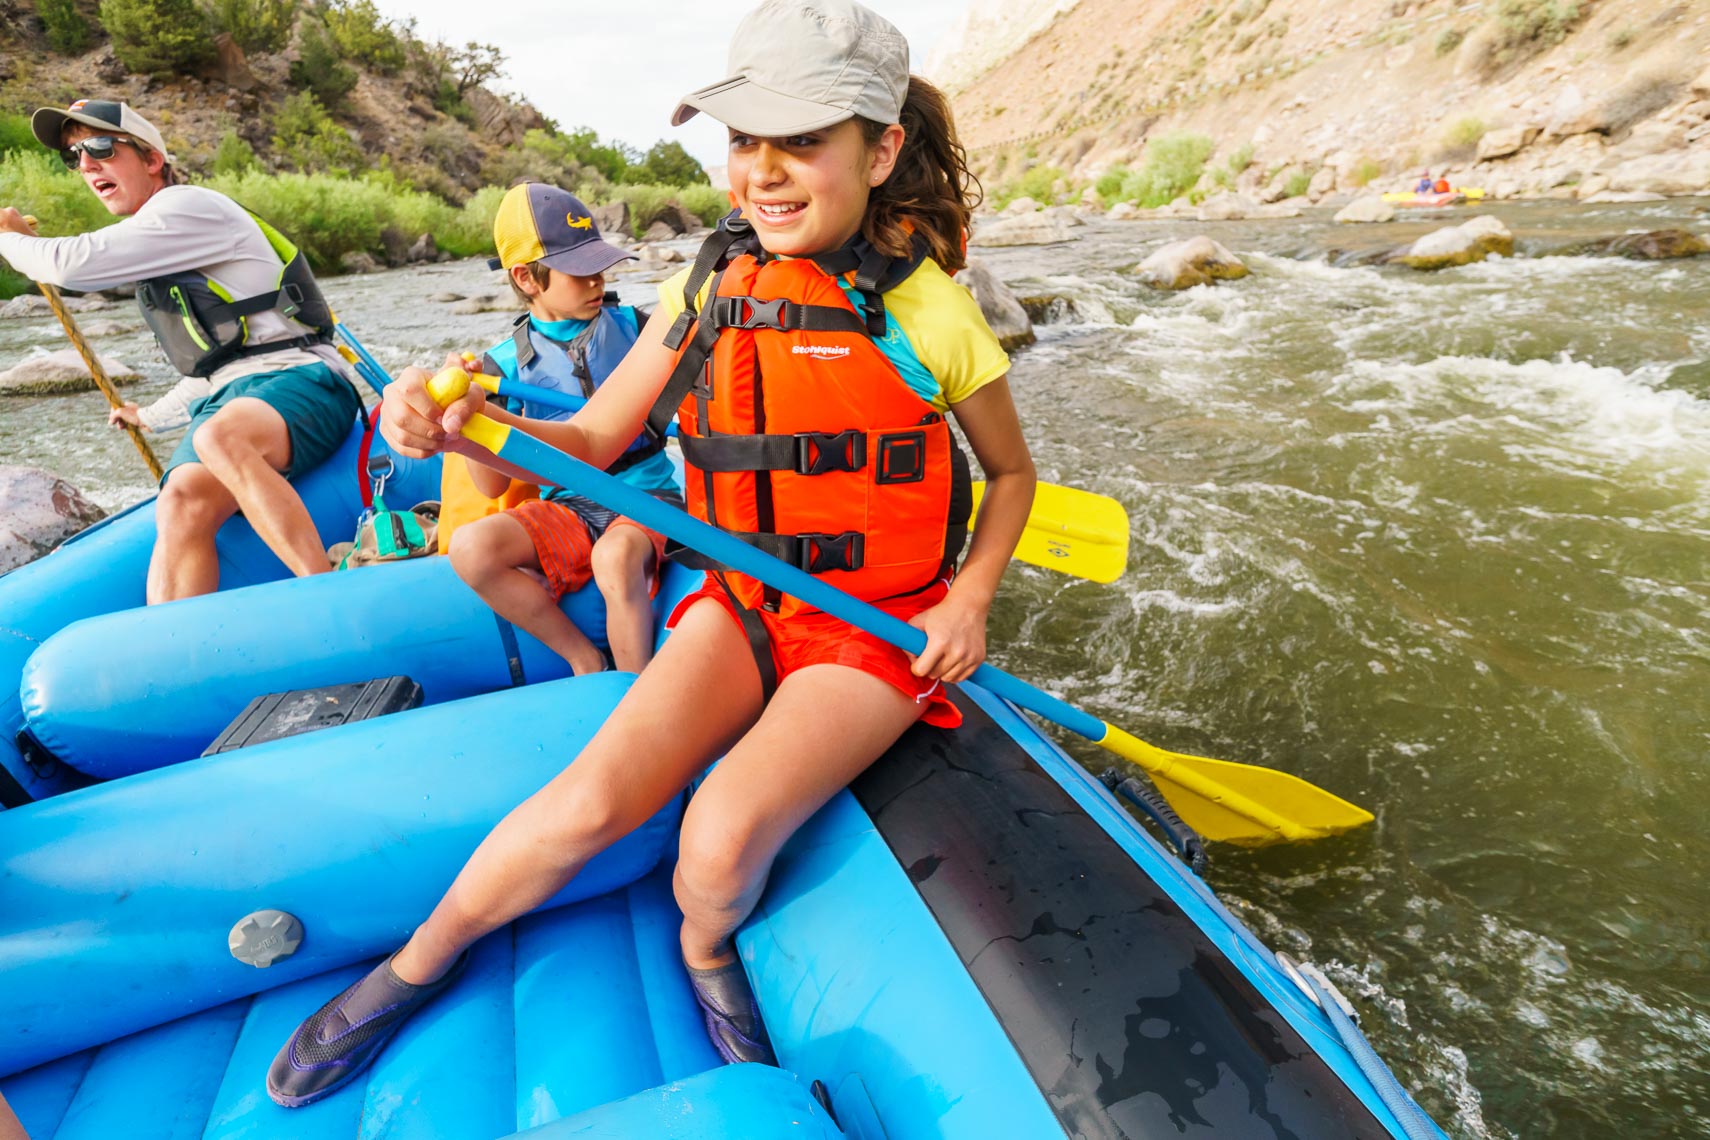 Kids Guided Raft Trip in New Mexico | Photographer Michael DeYoung